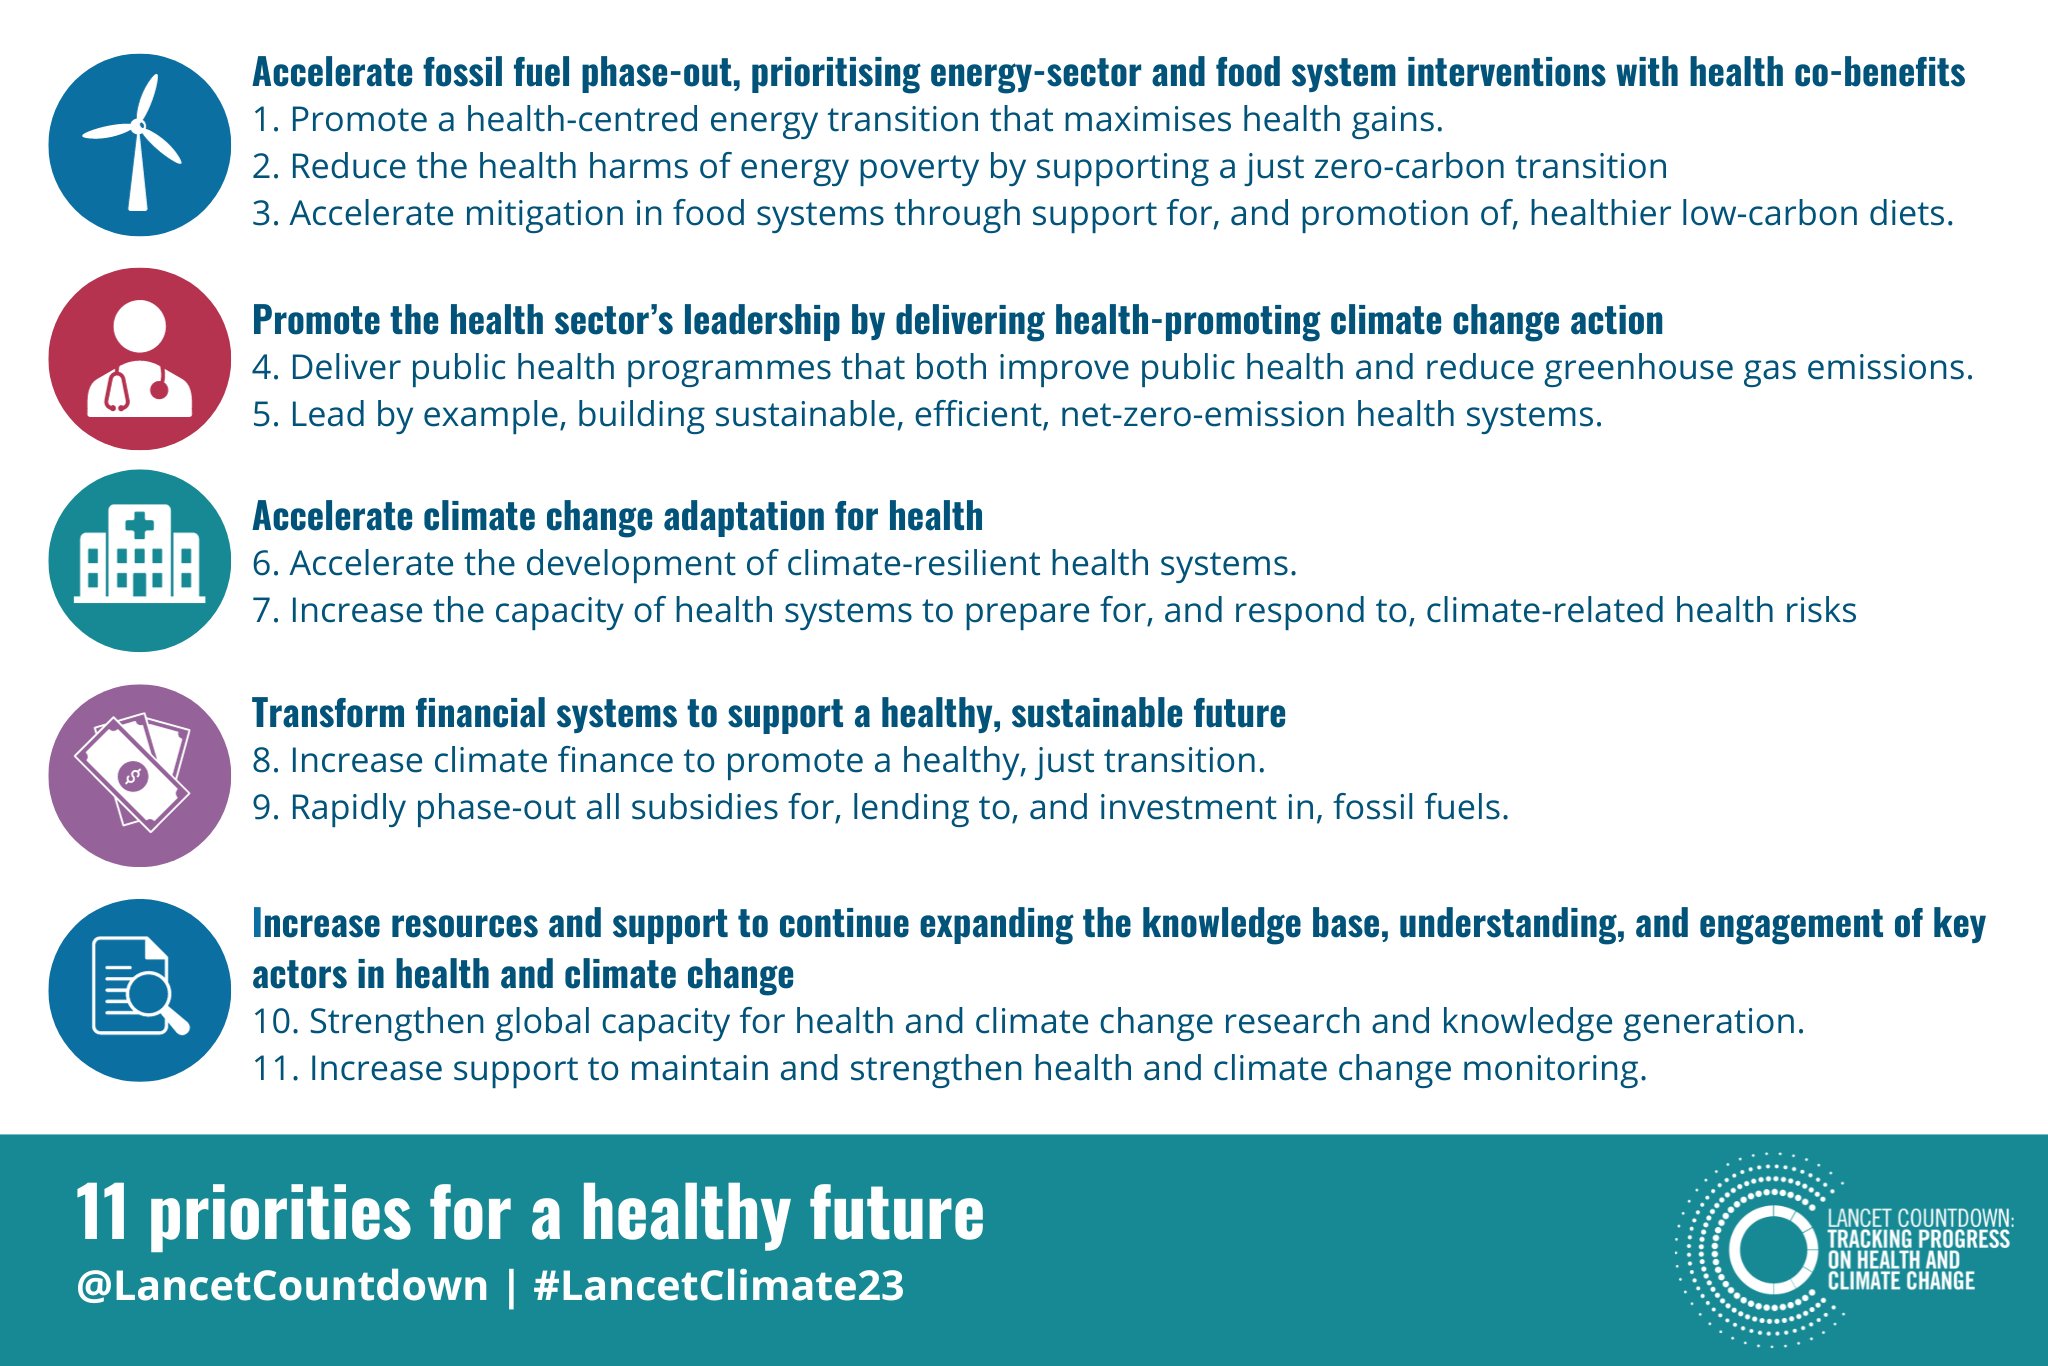 11 priorities for a healthy future Lancet Countdown 2023